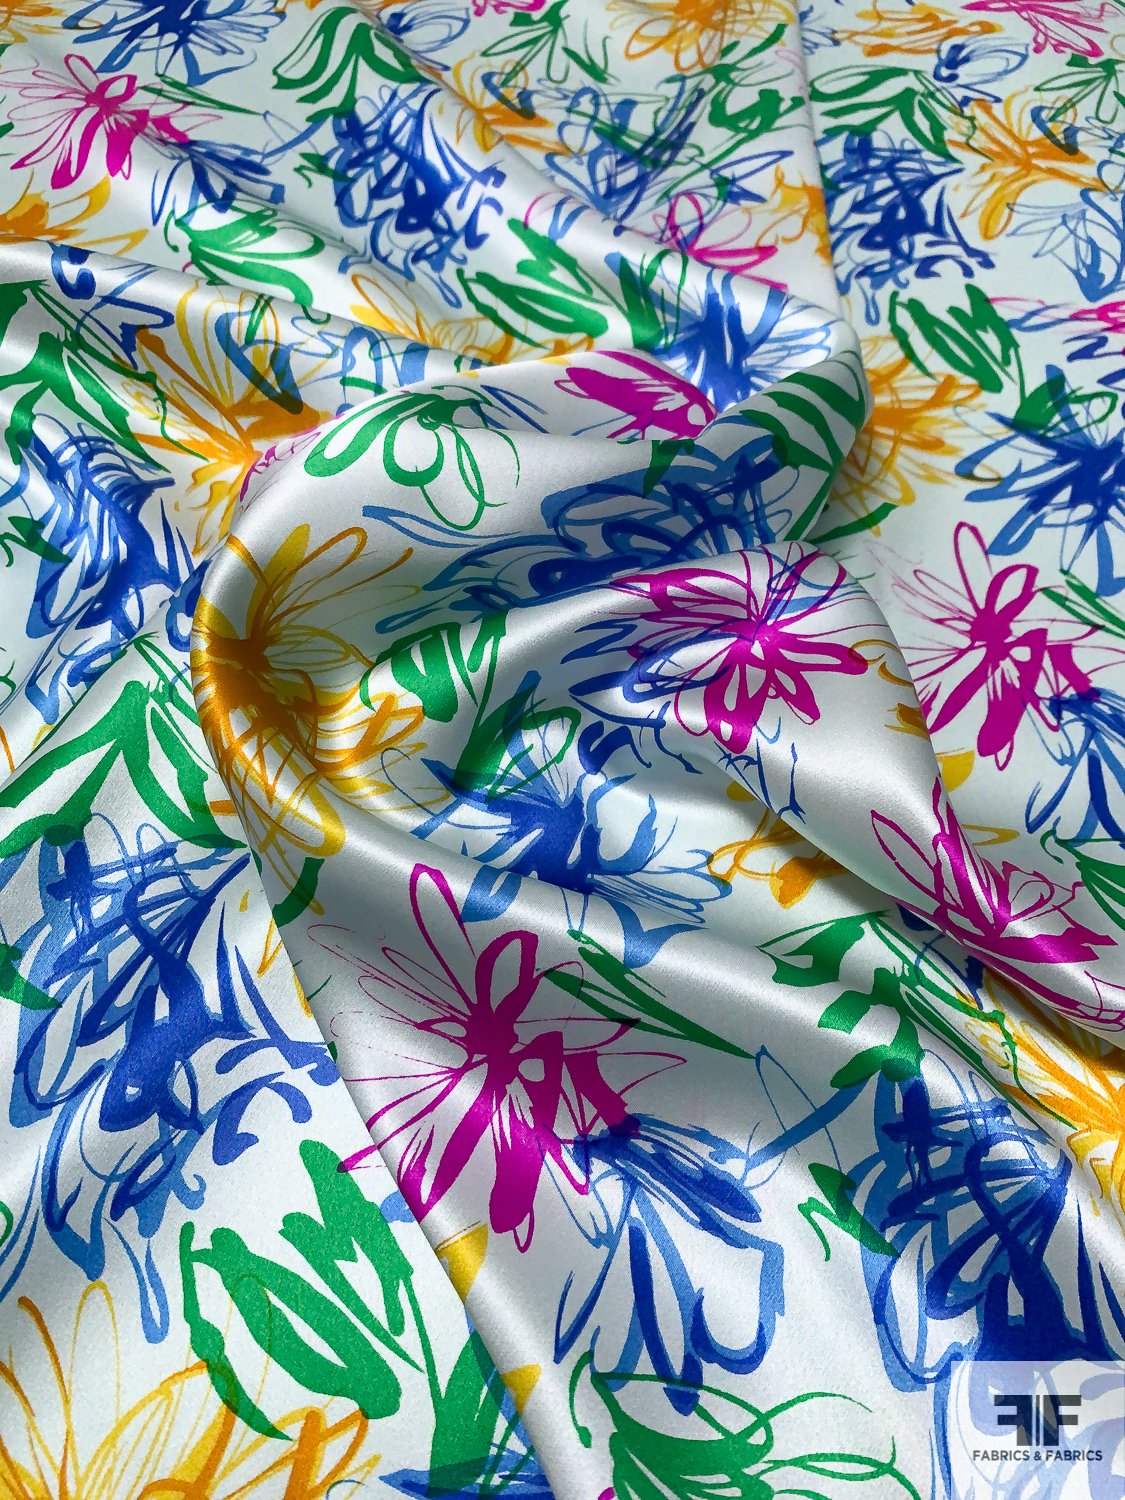 Painterly Floral Sketch Printed Silk Charmeuse - Light Seafoam / Blue / Magenta / Yellow / Green